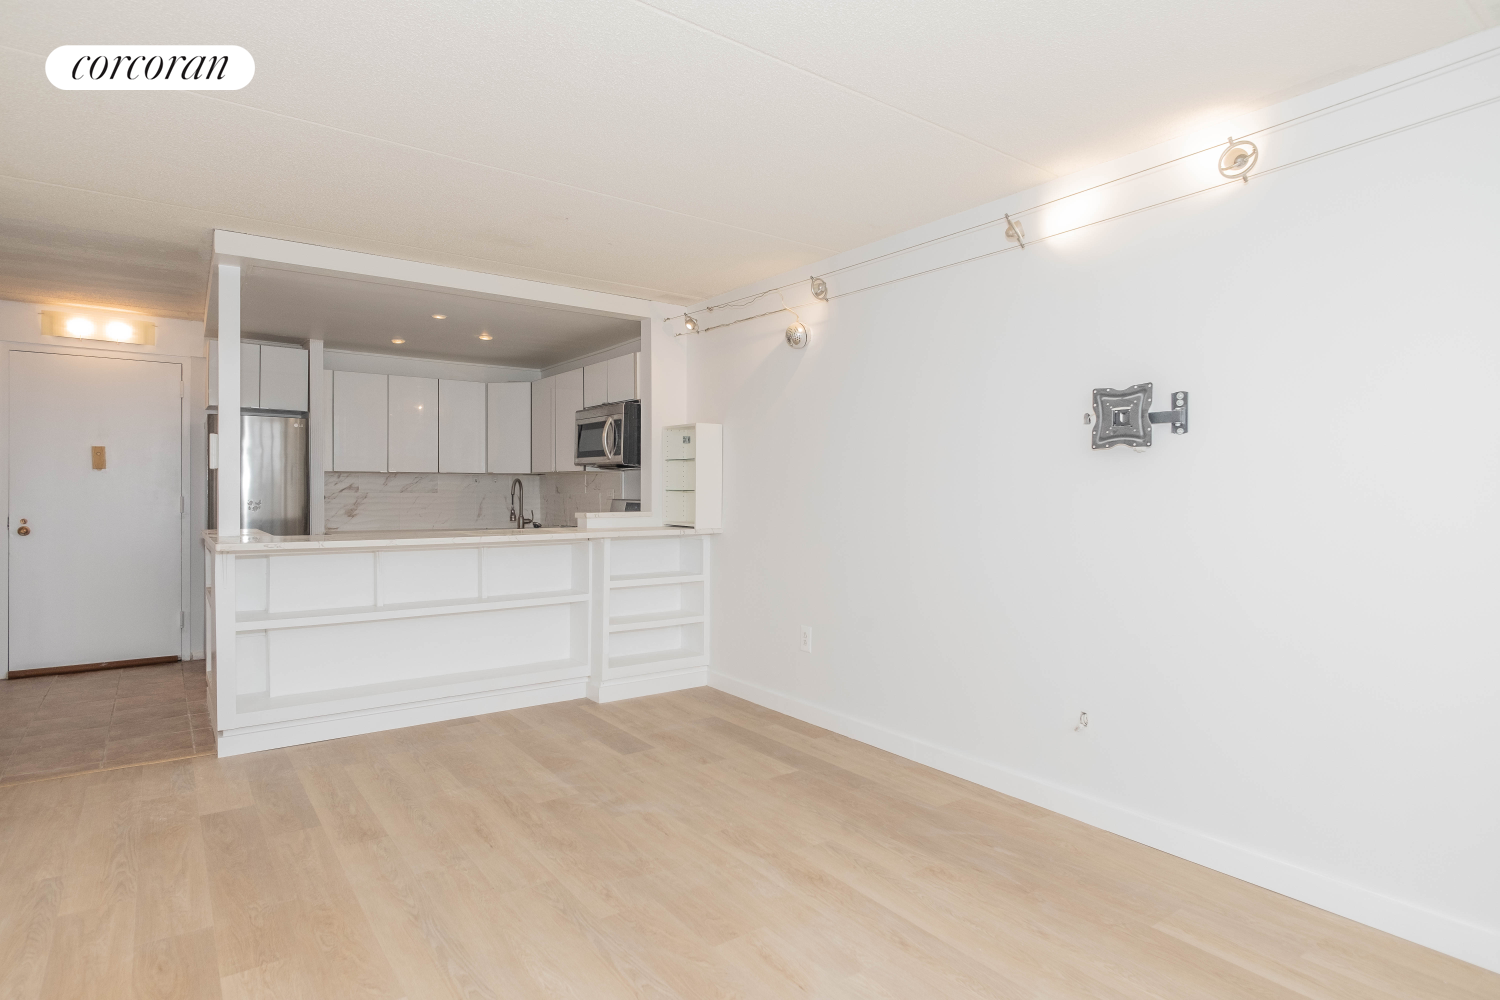 301 West 110th Street 19D, South Harlem, Upper Manhattan, NYC - 1 Bedrooms  
1 Bathrooms  
3 Rooms - 